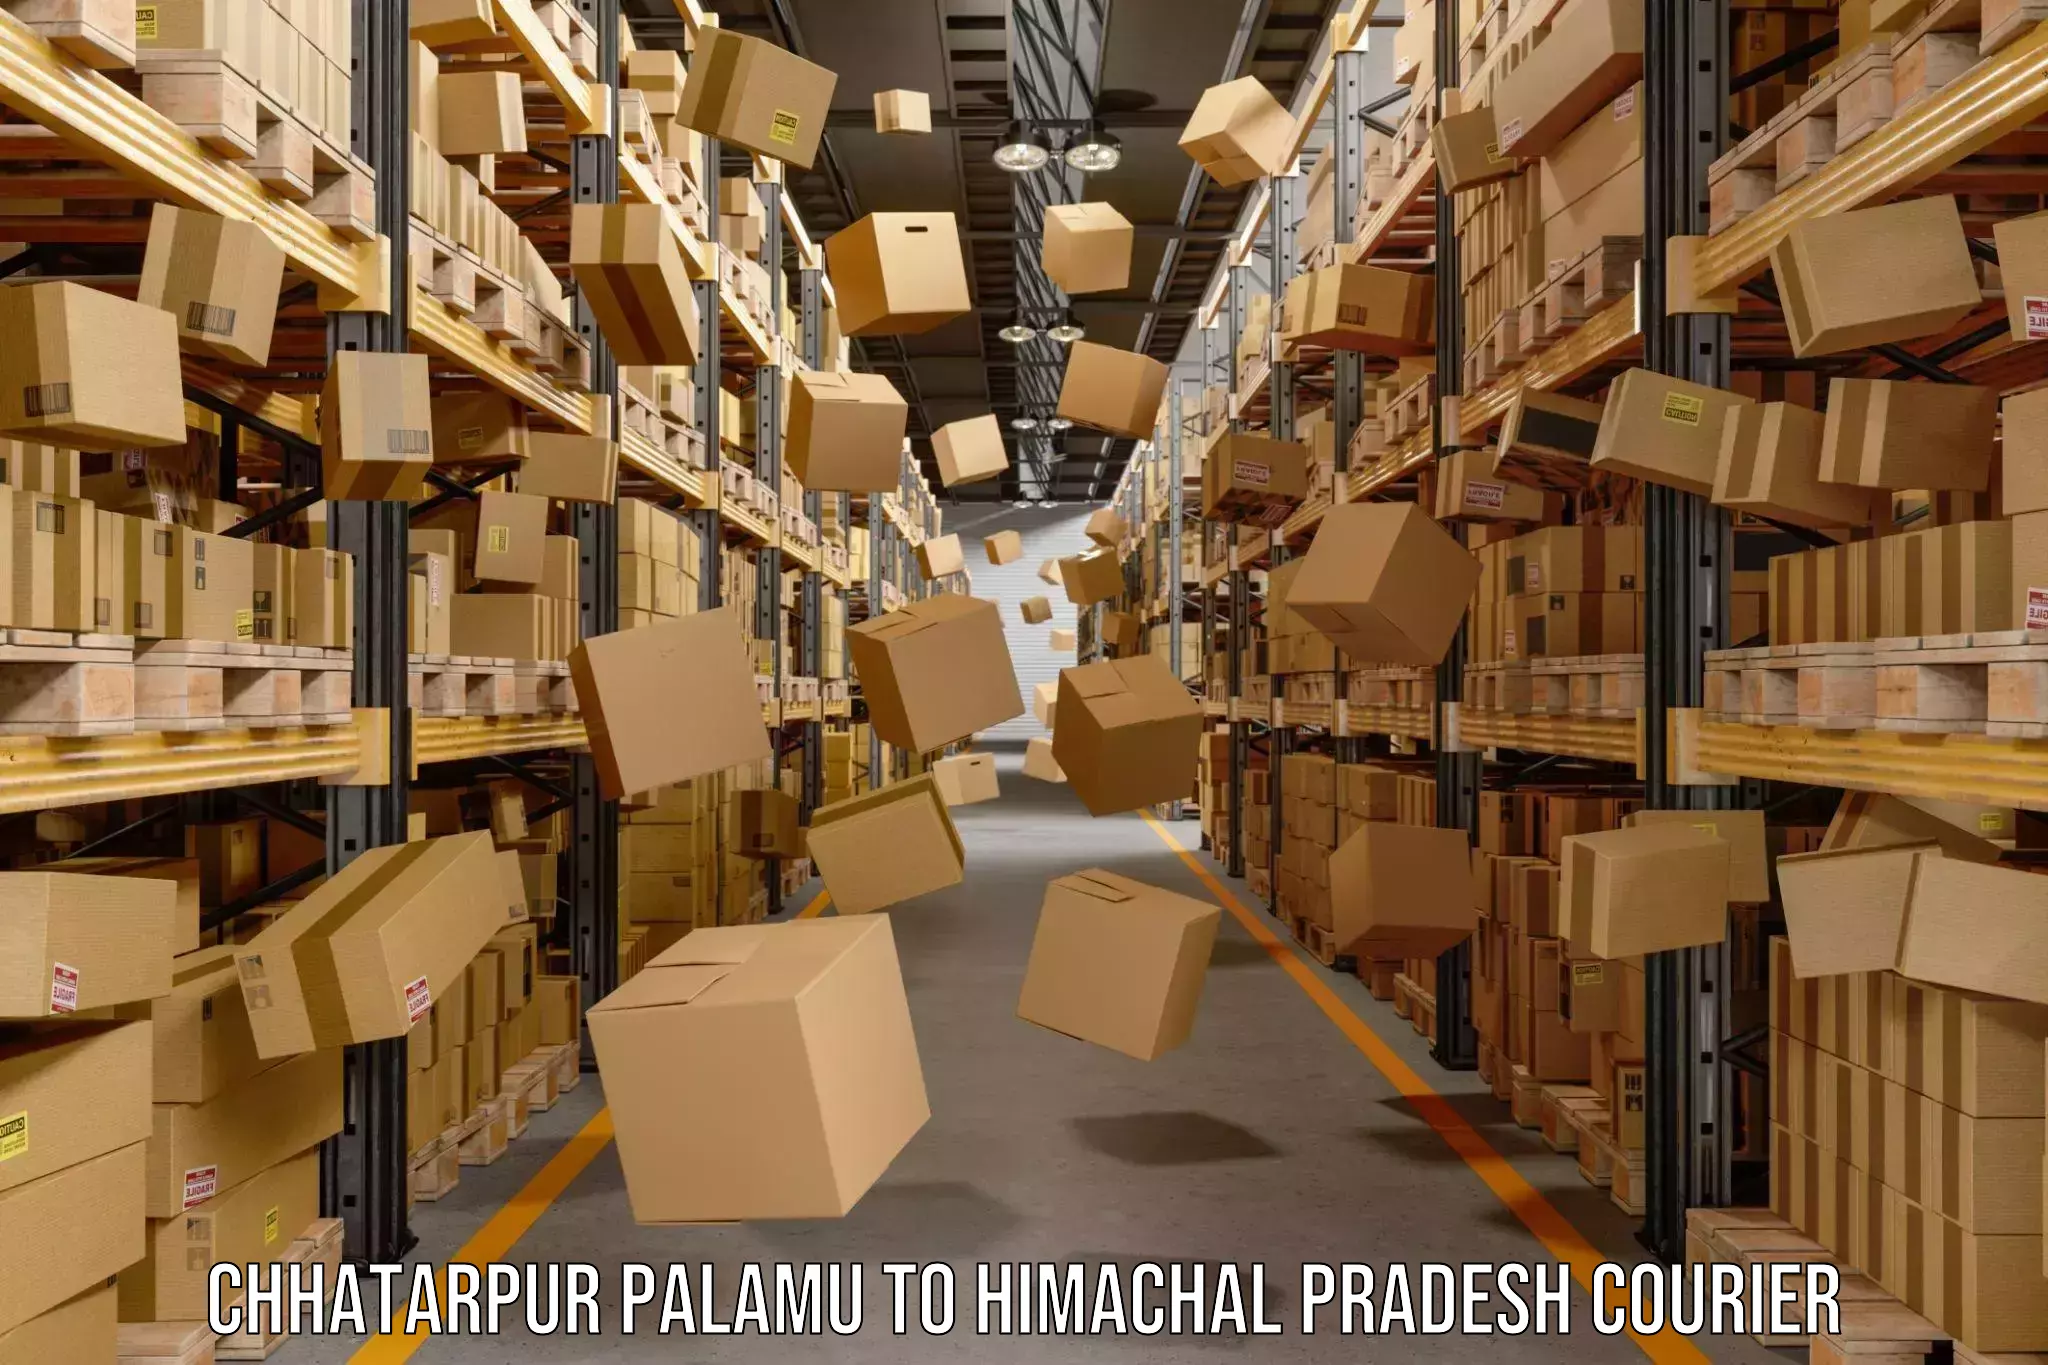 State-of-the-art courier technology Chhatarpur Palamu to Rehan